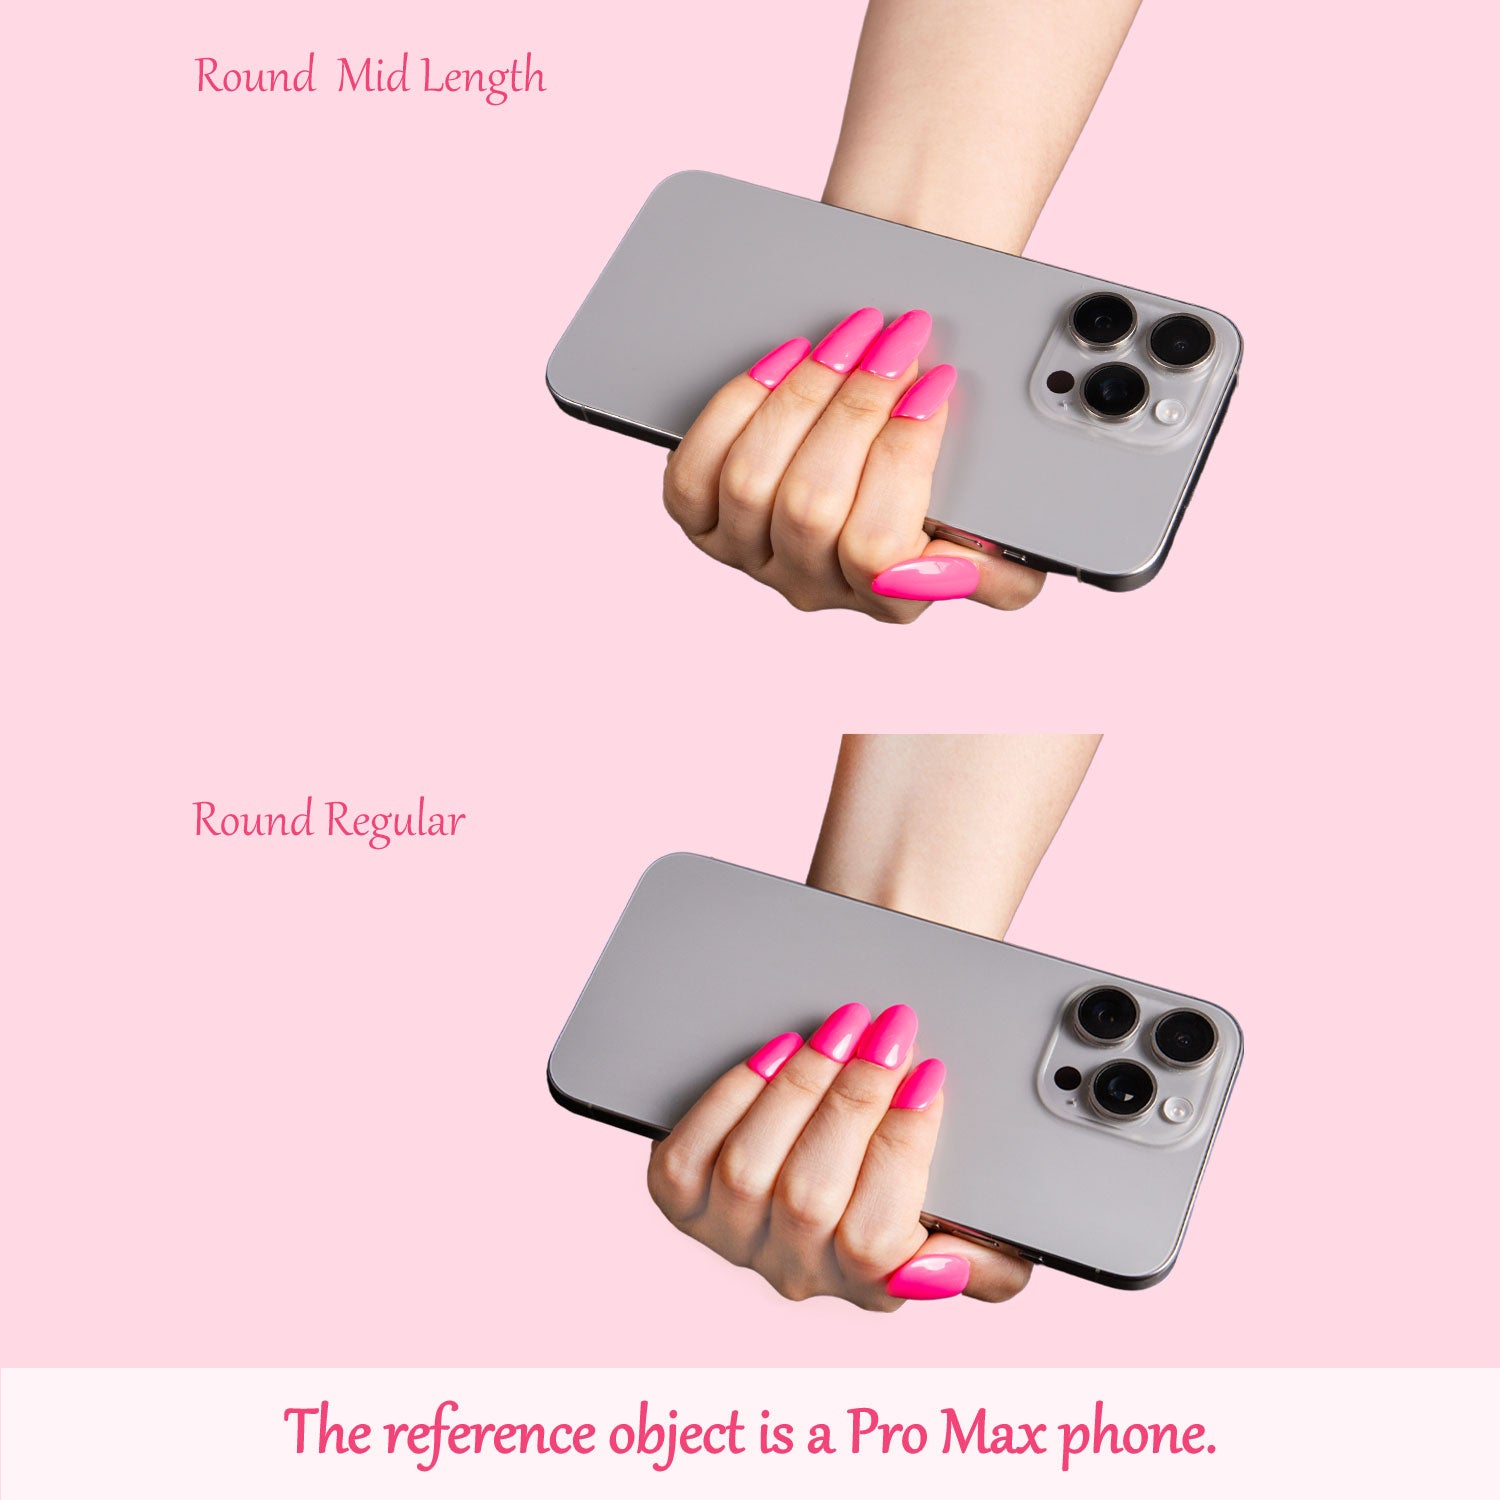 Comparison of Round Mid Length and Round Regular pink press-on nails on hands holding a Pro Max phone. Text: 'Round Mid Length,' 'Round Regular,' and 'The reference object is a Pro Max phone.'